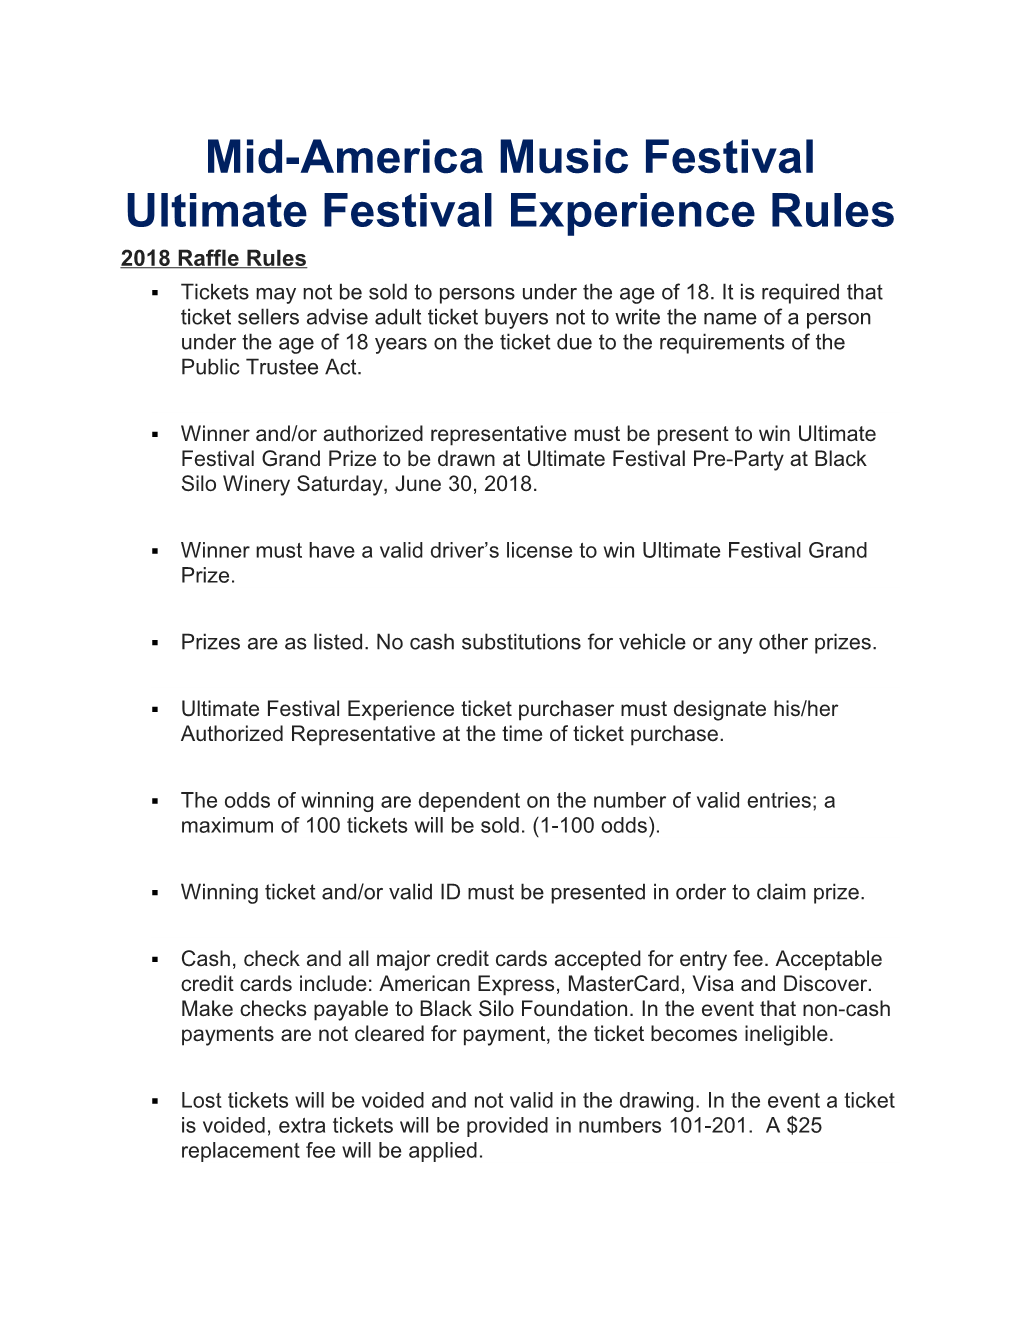 Mid-America Music Festival Ultimate Festival Experience Rules